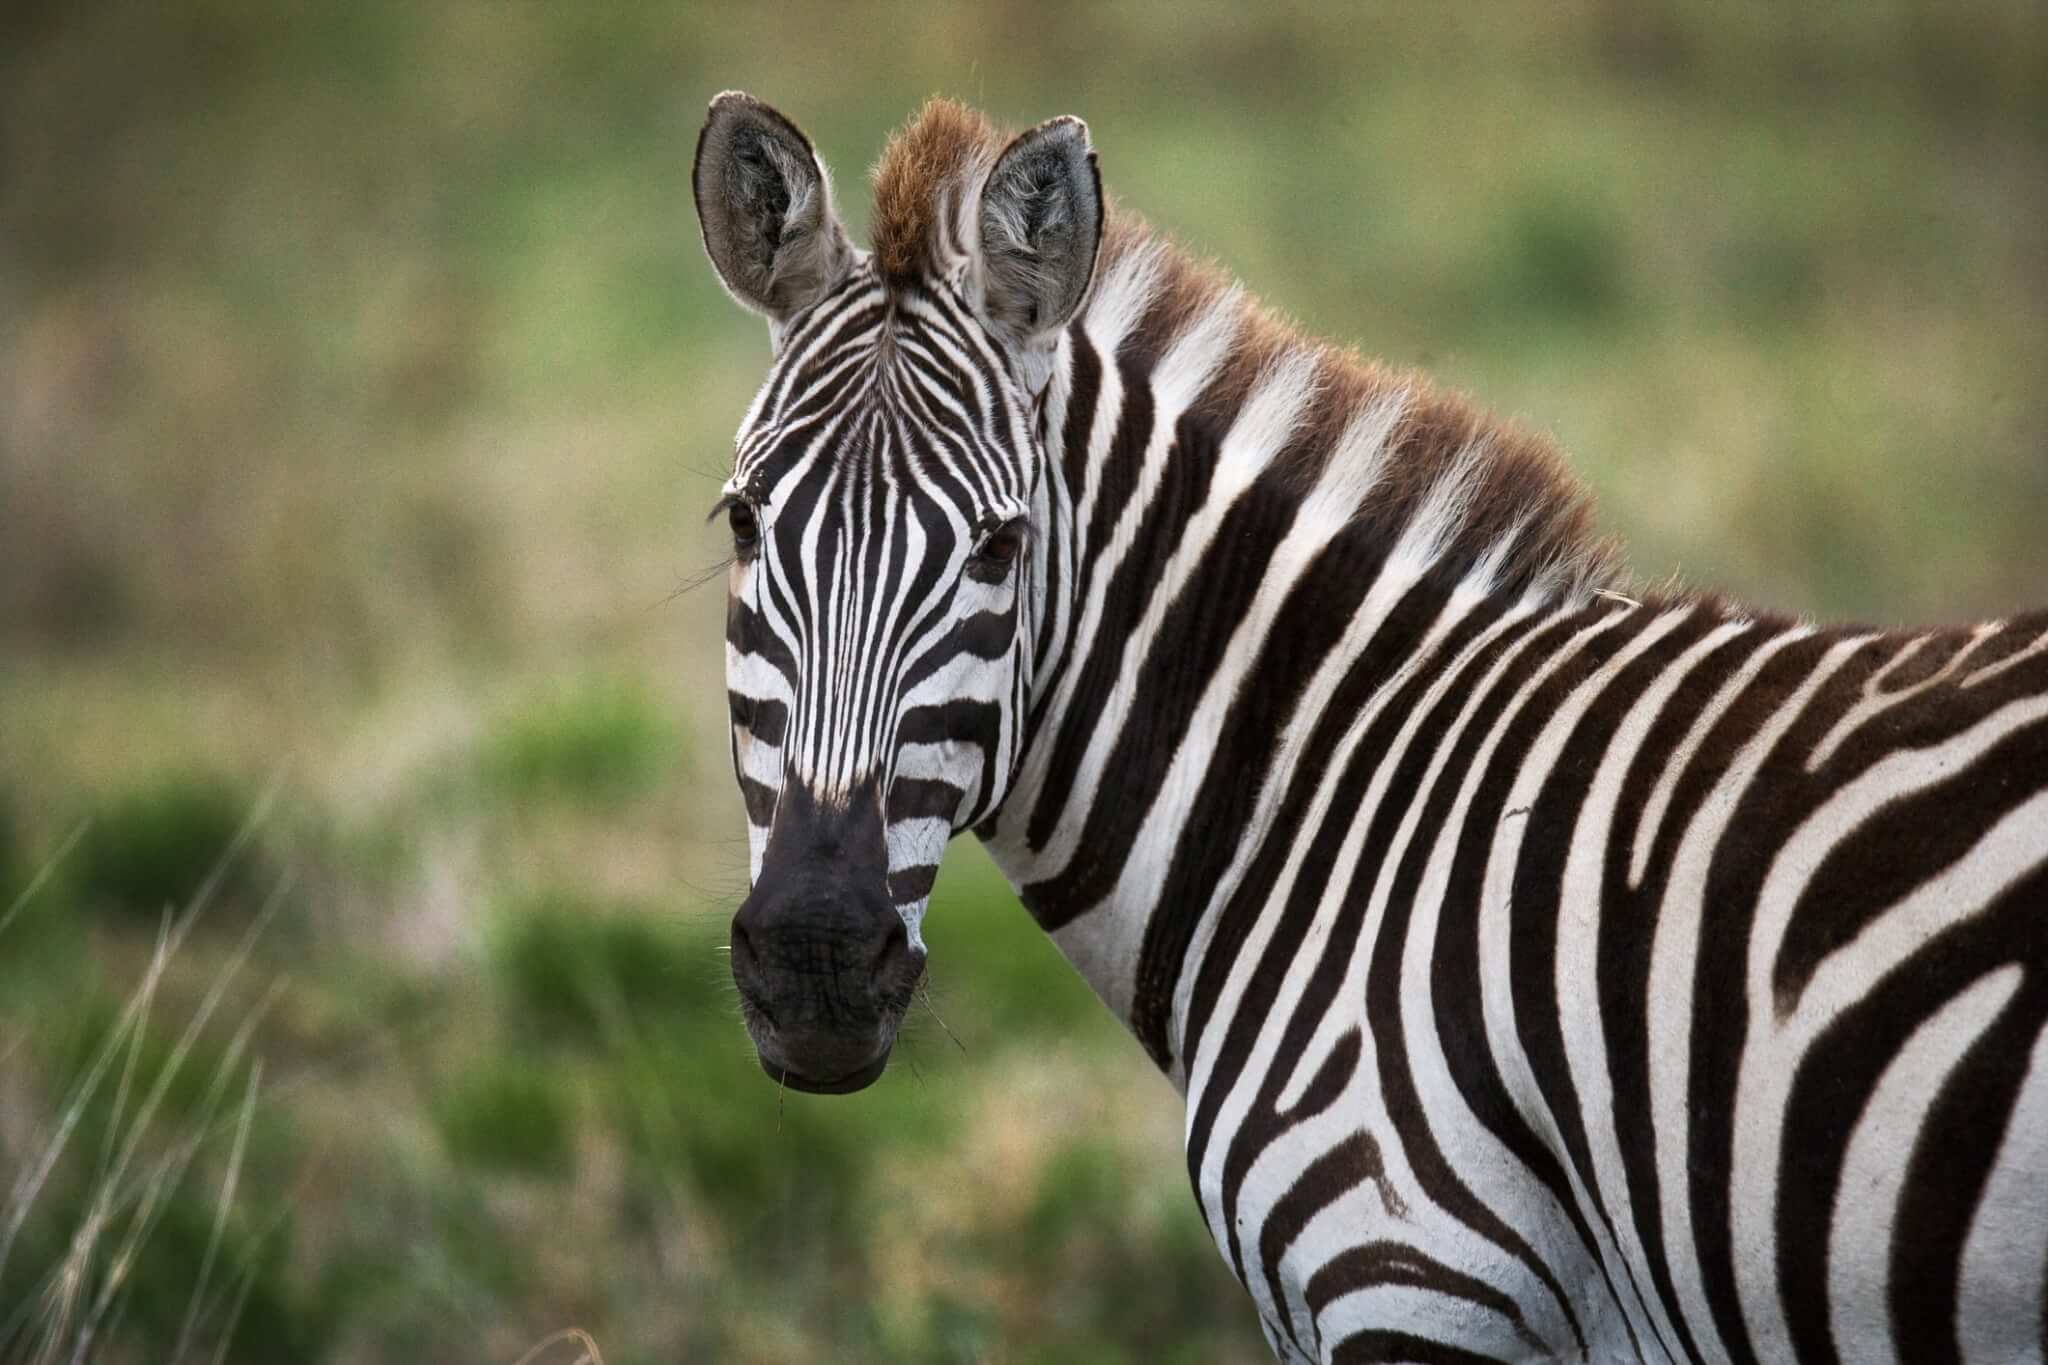 What you can learn from the zebra